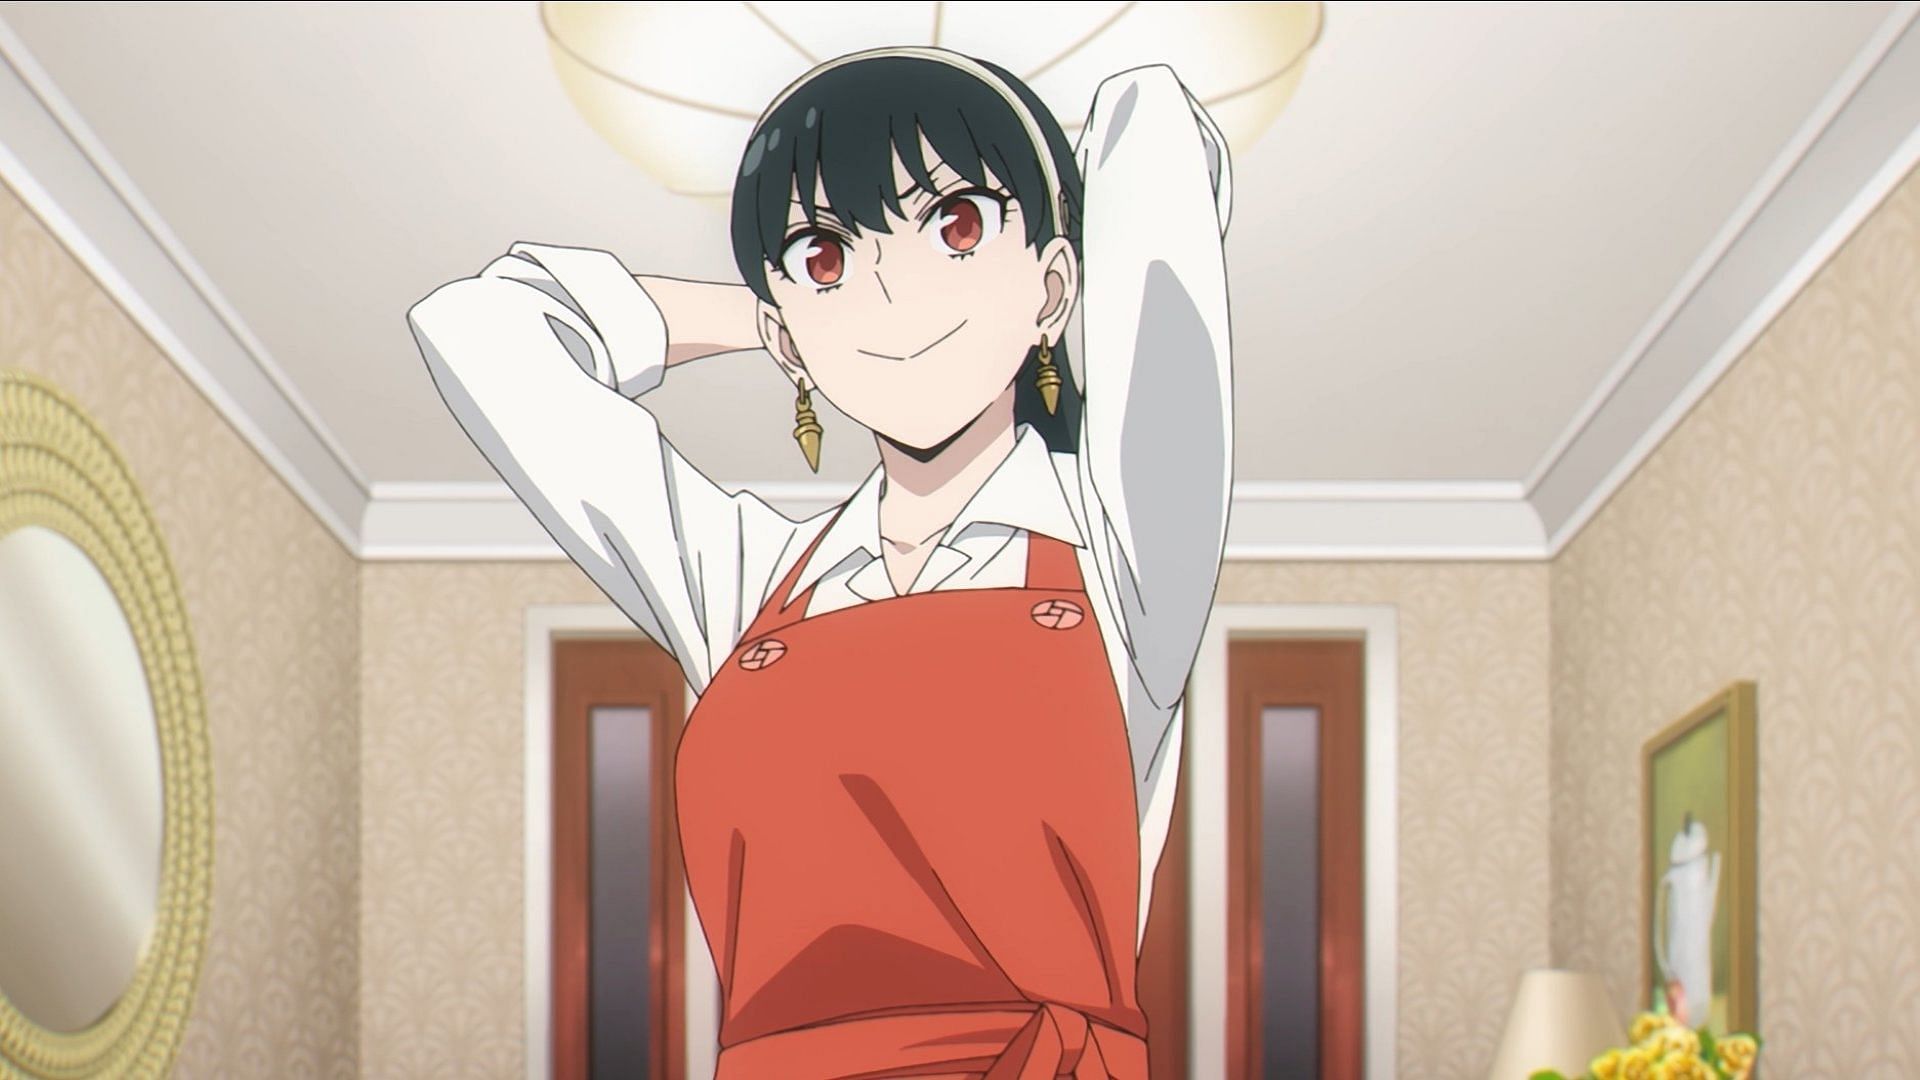 Yor getting ready to cook in Spy X Family episode 16 (Image via Wit Studio)